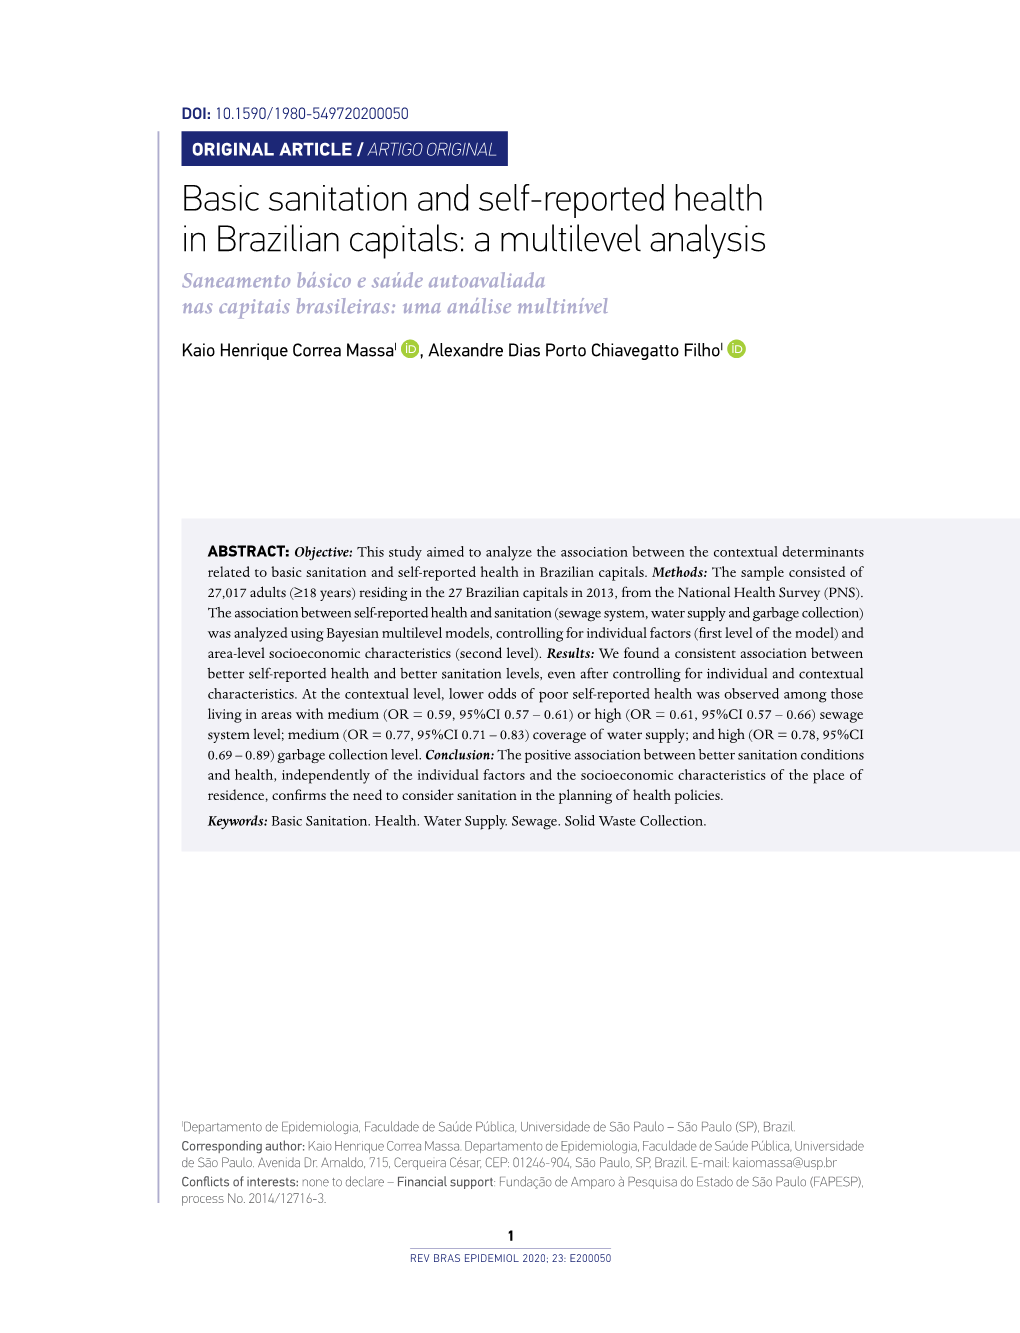 Basic Sanitation and Self-Reported Health in Brazilian Capitals